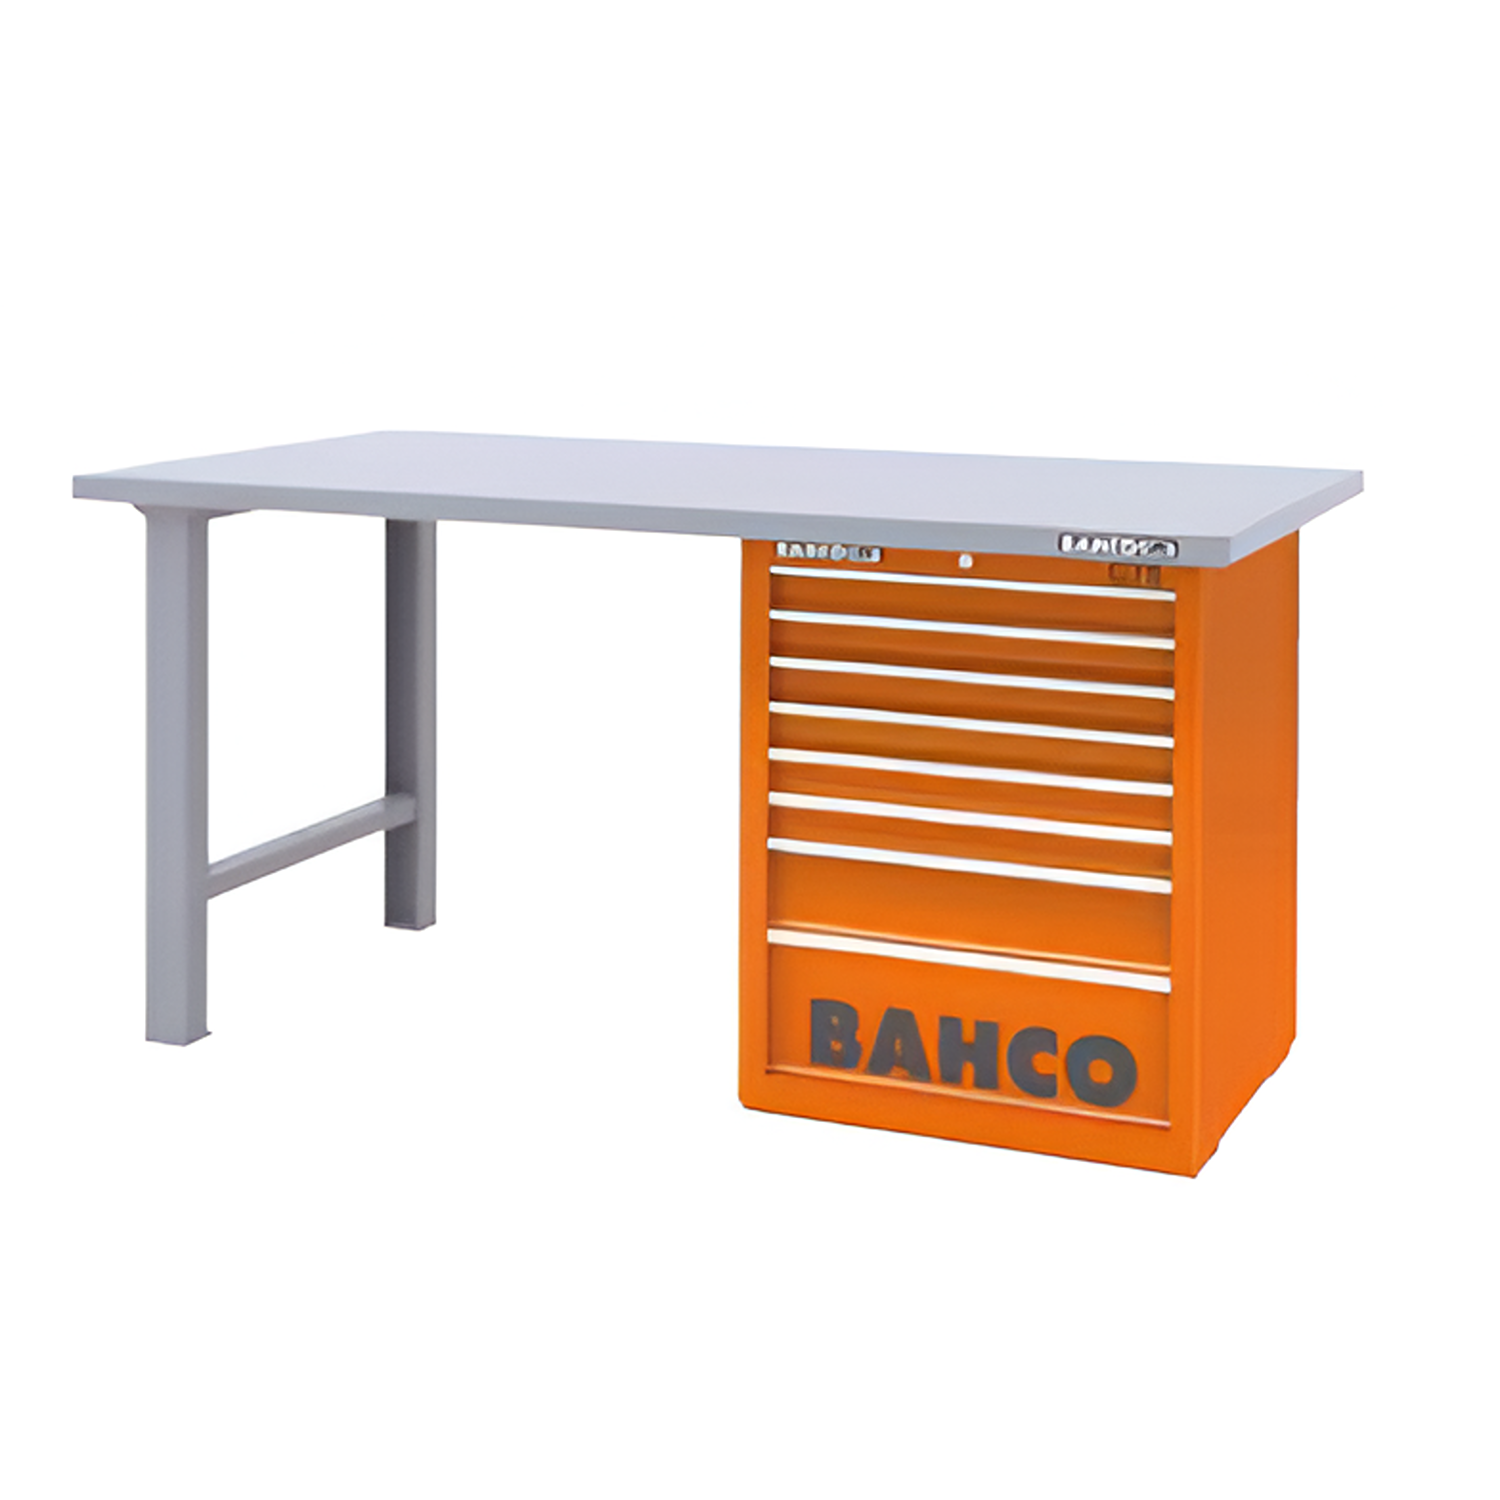 BAHCO 1495KH8WBTS Heavy Duty Workbench with Steel & Tool Trolleys - Premium Workbench from BAHCO - Shop now at Yew Aik.